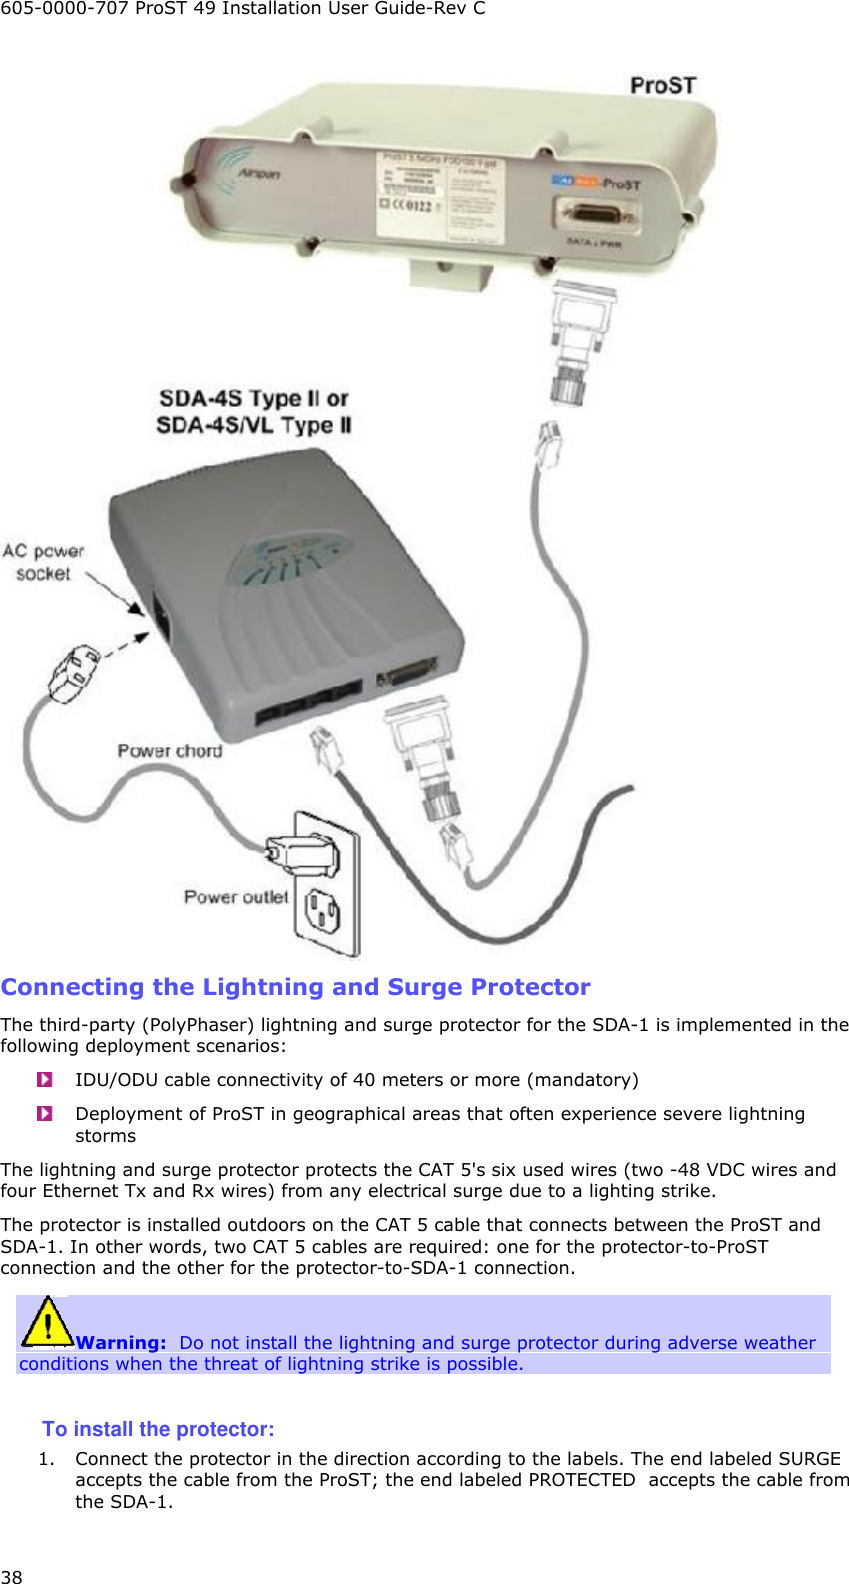 605-0000-707 ProST 49 Installation User Guide-Rev C 38  Connecting the Lightning and Surge Protector The third-party (PolyPhaser) lightning and surge protector for the SDA-1 is implemented in the following deployment scenarios:  IDU/ODU cable connectivity of 40 meters or more (mandatory)   Deployment of ProST in geographical areas that often experience severe lightning storms The lightning and surge protector protects the CAT 5&apos;s six used wires (two -48 VDC wires and four Ethernet Tx and Rx wires) from any electrical surge due to a lighting strike.  The protector is installed outdoors on the CAT 5 cable that connects between the ProST and SDA-1. In other words, two CAT 5 cables are required: one for the protector-to-ProST connection and the other for the protector-to-SDA-1 connection. Warning:  Do not install the lightning and surge protector during adverse weather conditions when the threat of lightning strike is possible.  To install the protector: 1. Connect the protector in the direction according to the labels. The end labeled SURGE accepts the cable from the ProST; the end labeled PROTECTED  accepts the cable from the SDA-1. 